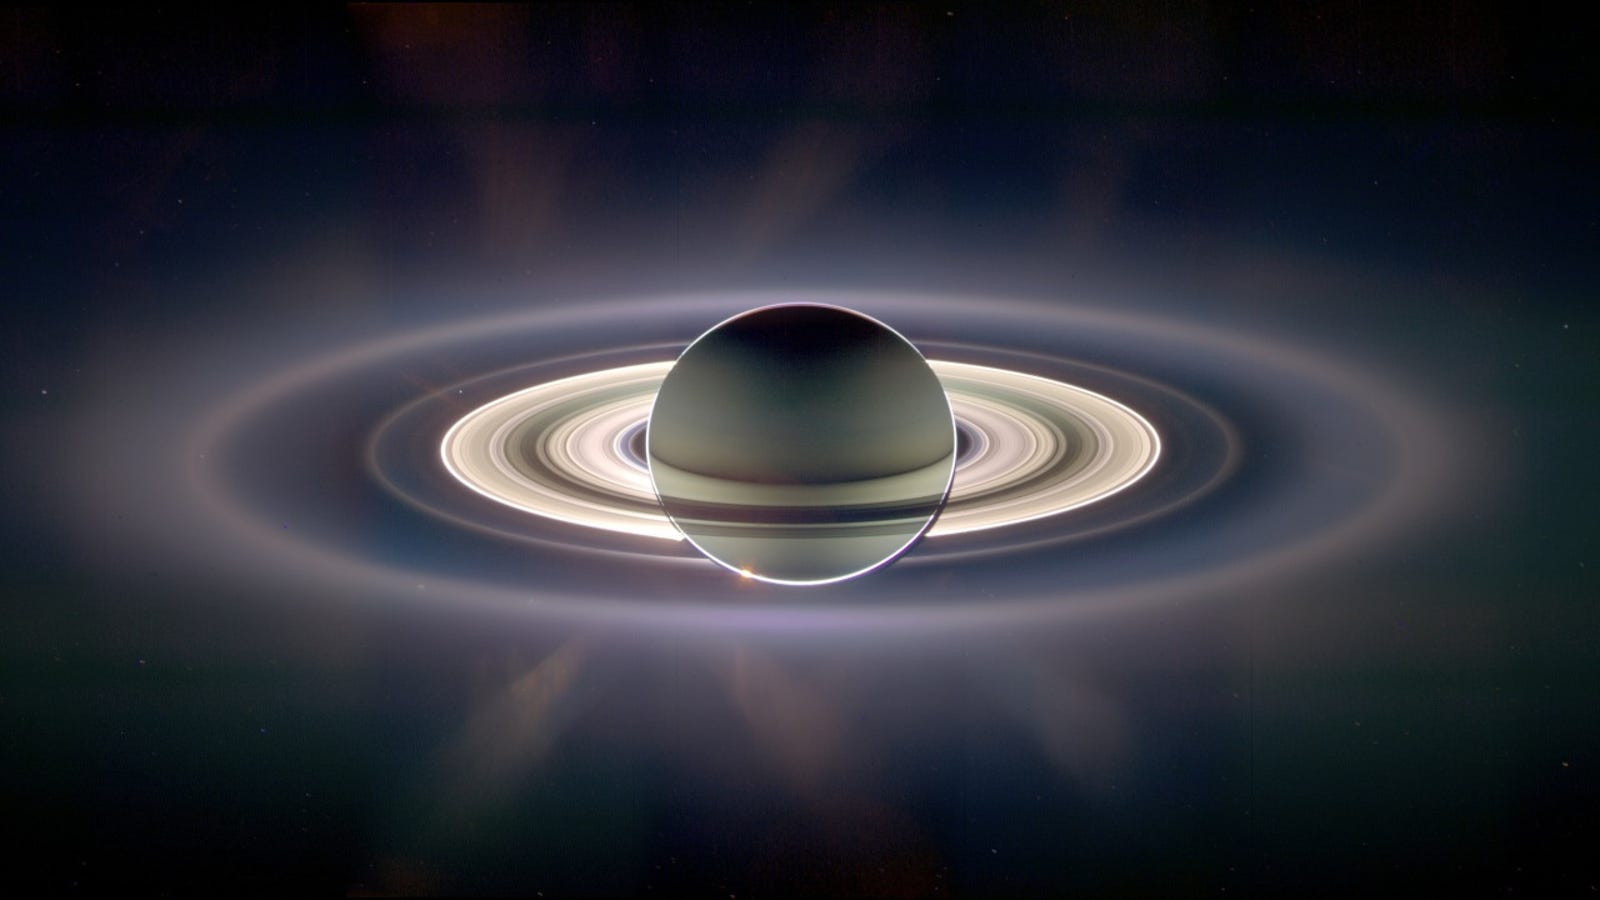 Quite possibly the most  beautiful  photo of Saturn ever taken